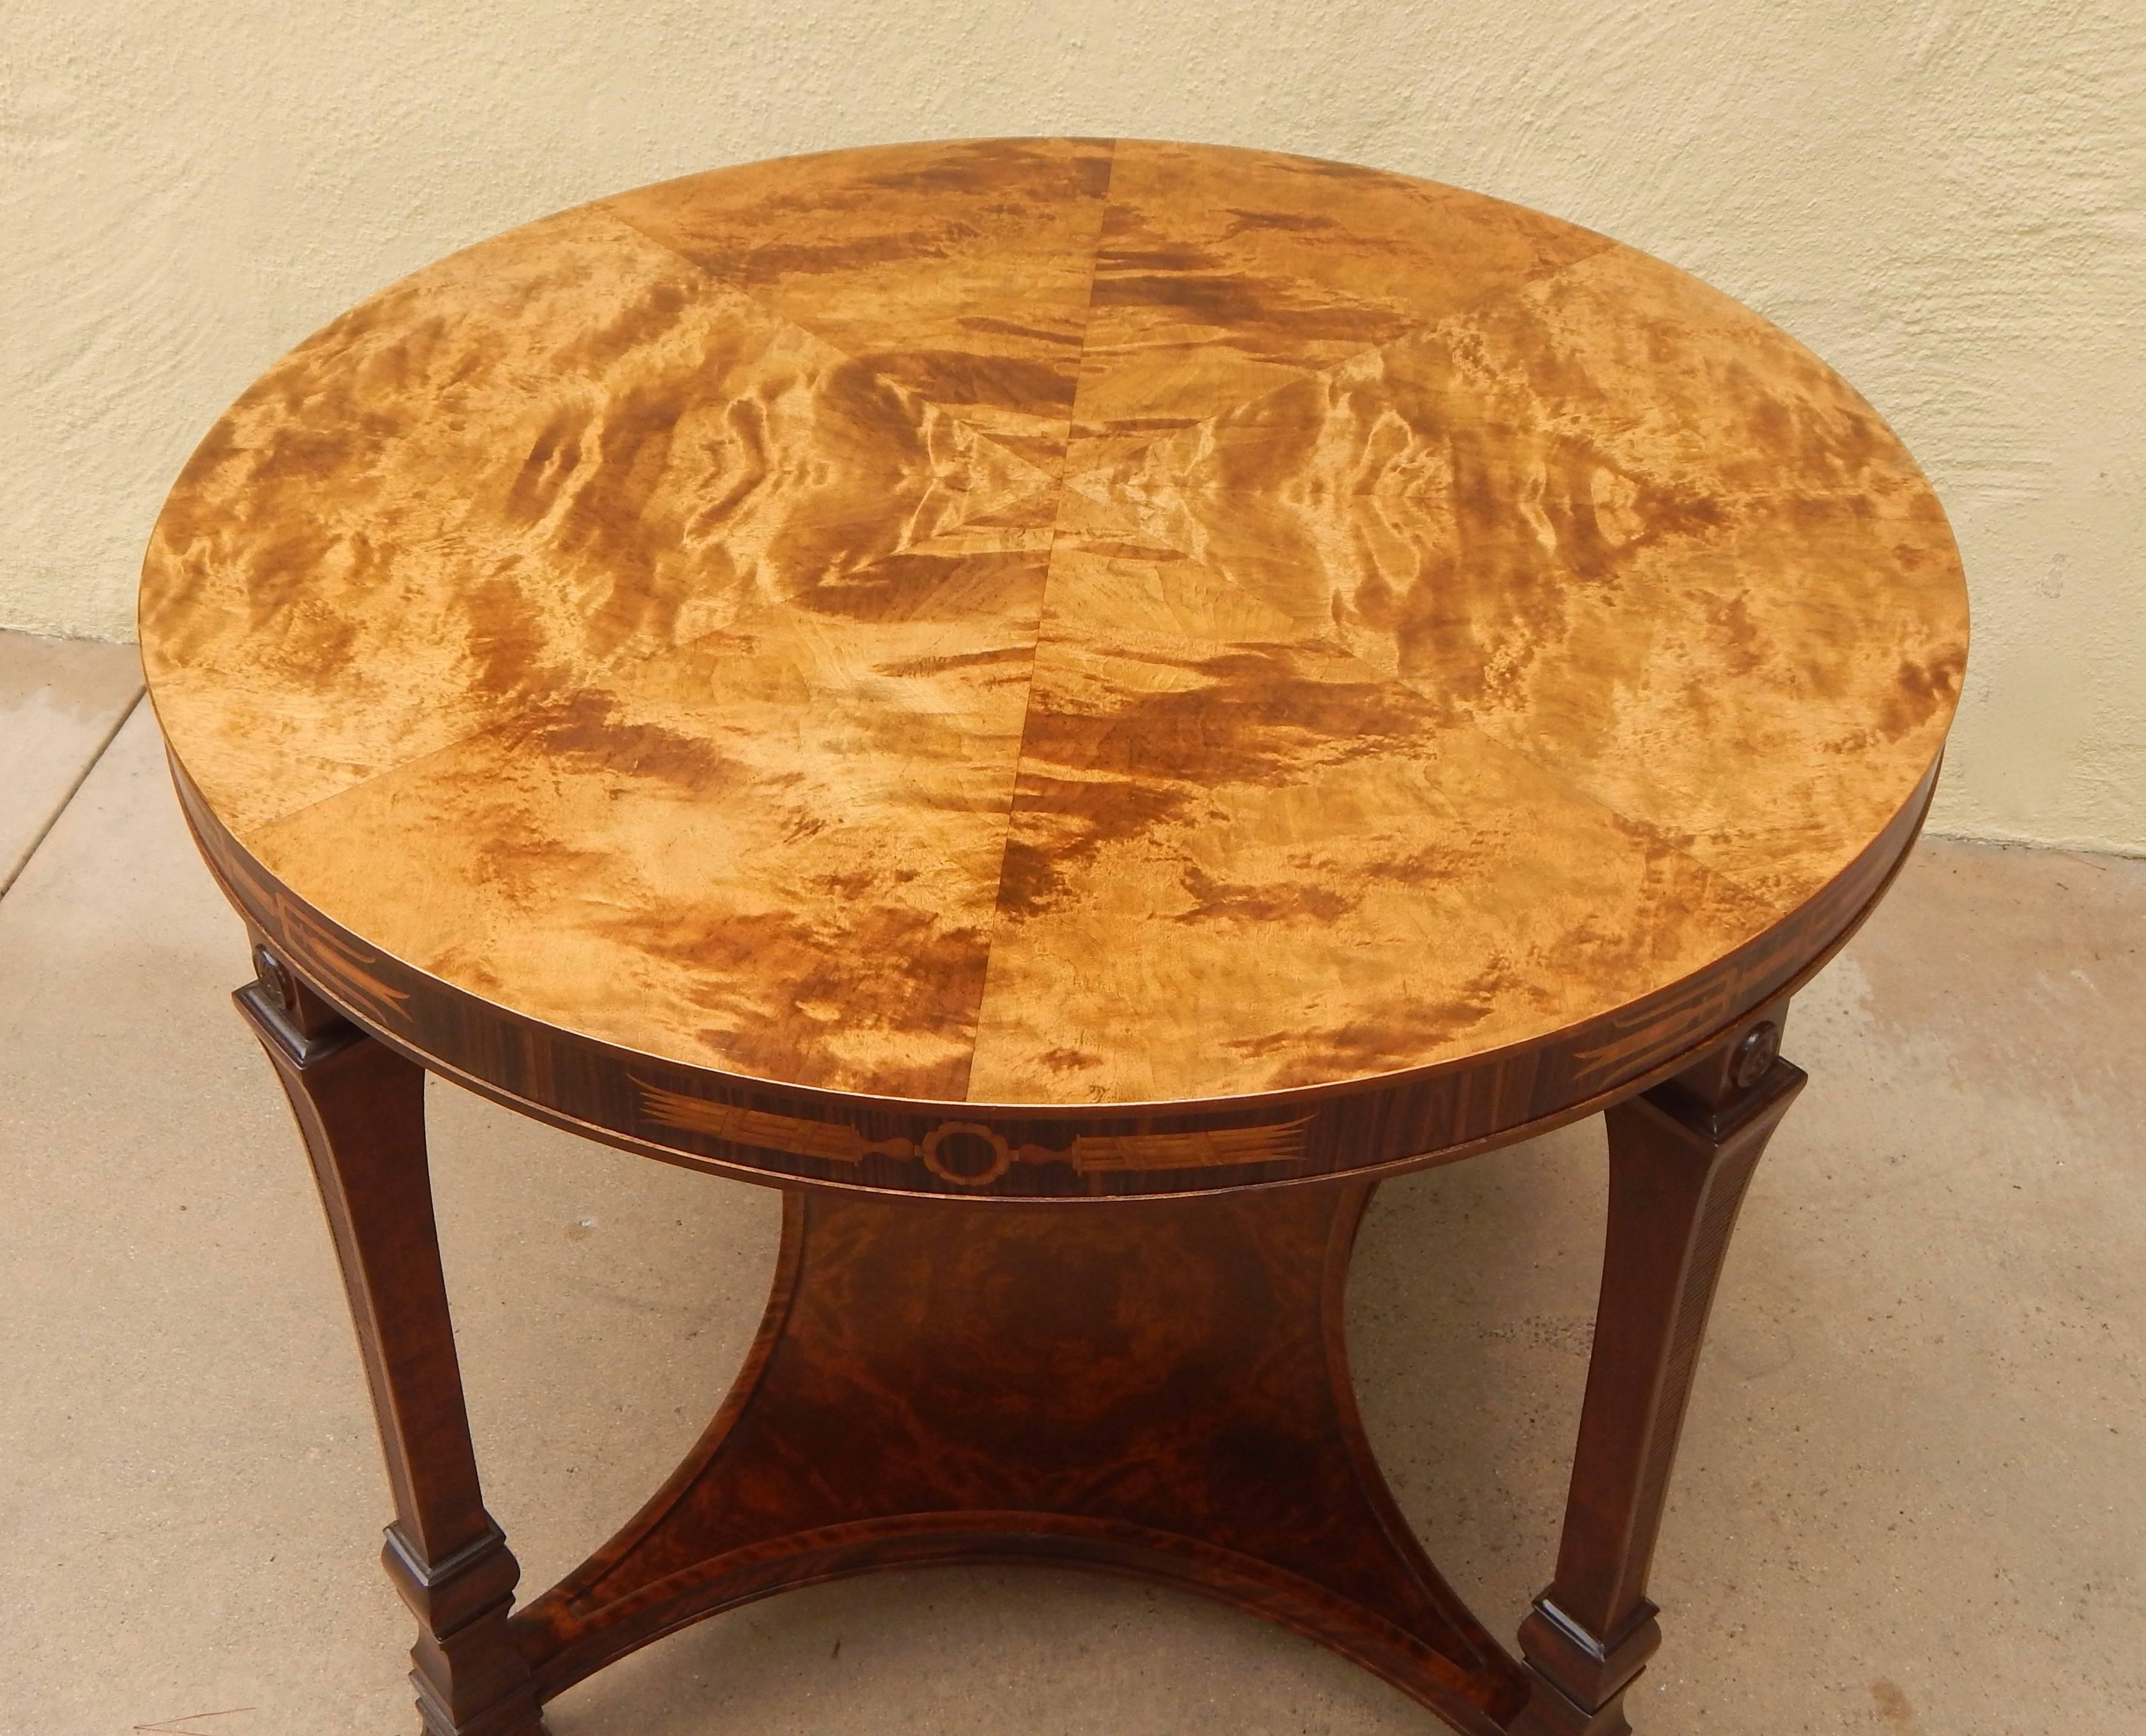 Swedish Grace (neo-classically inspired Art Deco) inlaid centre/side table rendered in birch with rosewood elm and ebony inlay. Top in highly figured, bookmatched golden flame birch wood. The piece has been sensitively restored by my woodworkers.